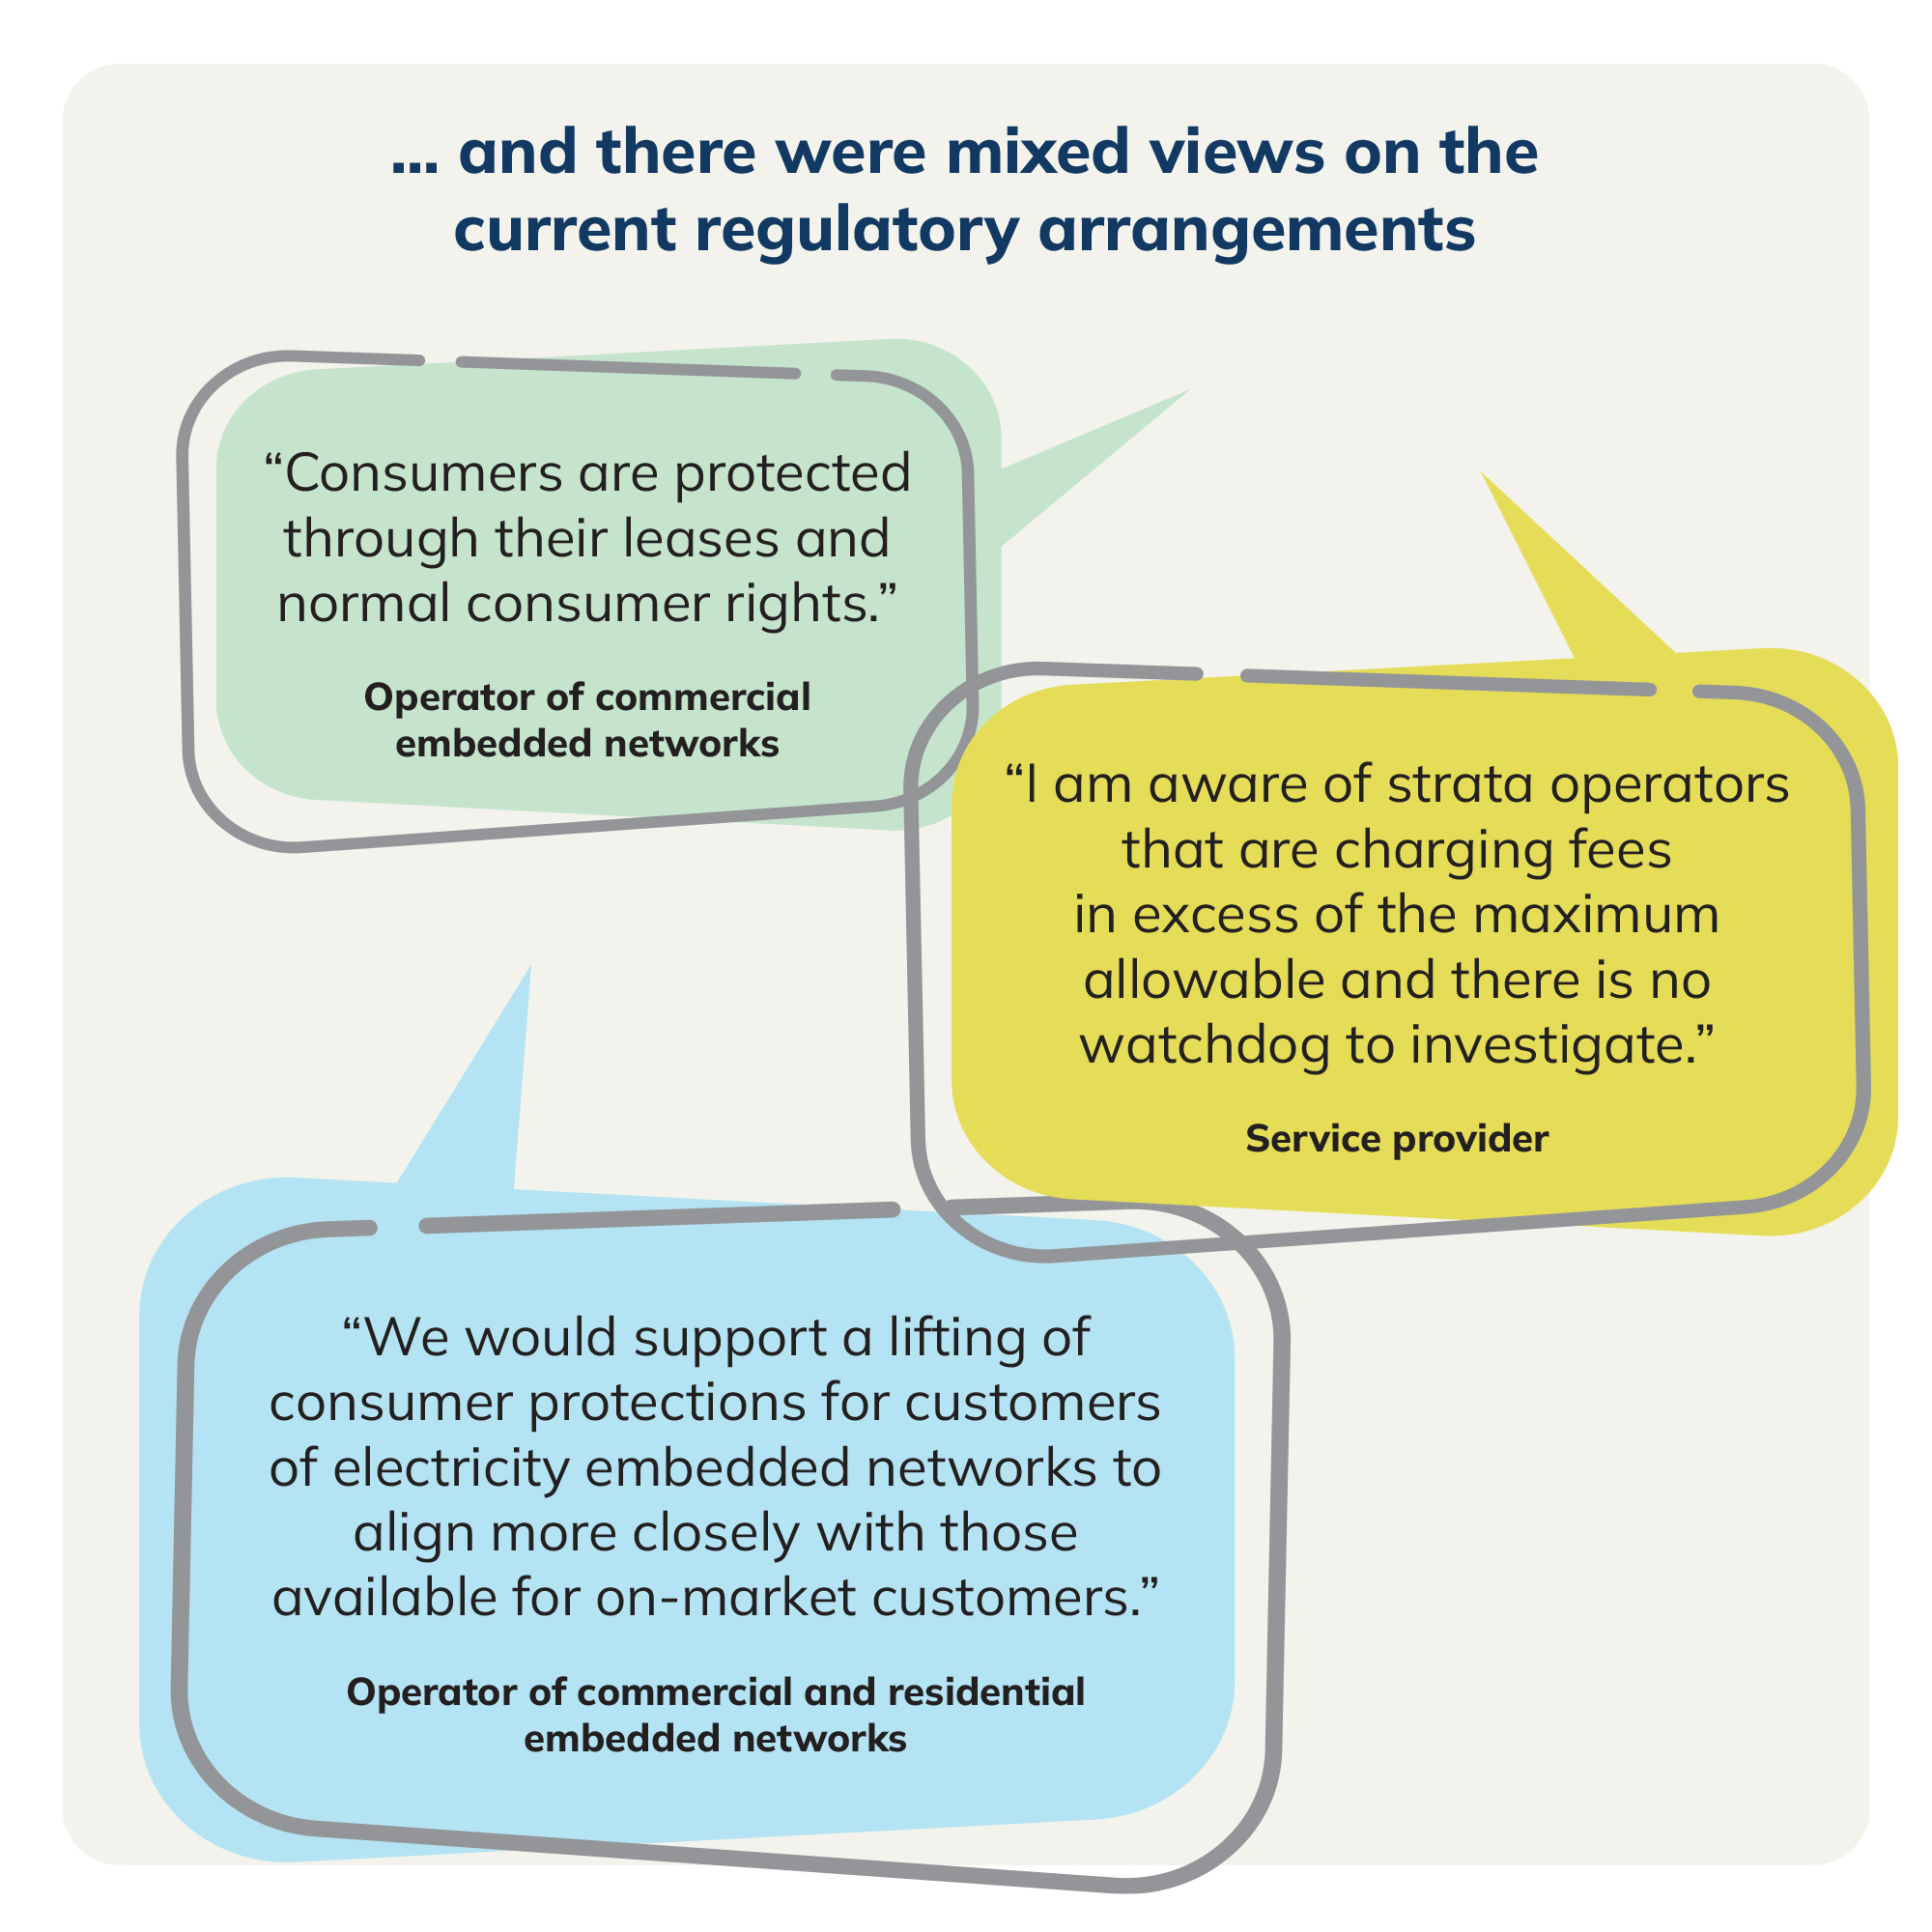 Network Operators and Service Providers 3 -  and there were mixed views on the current regulatory arrangements